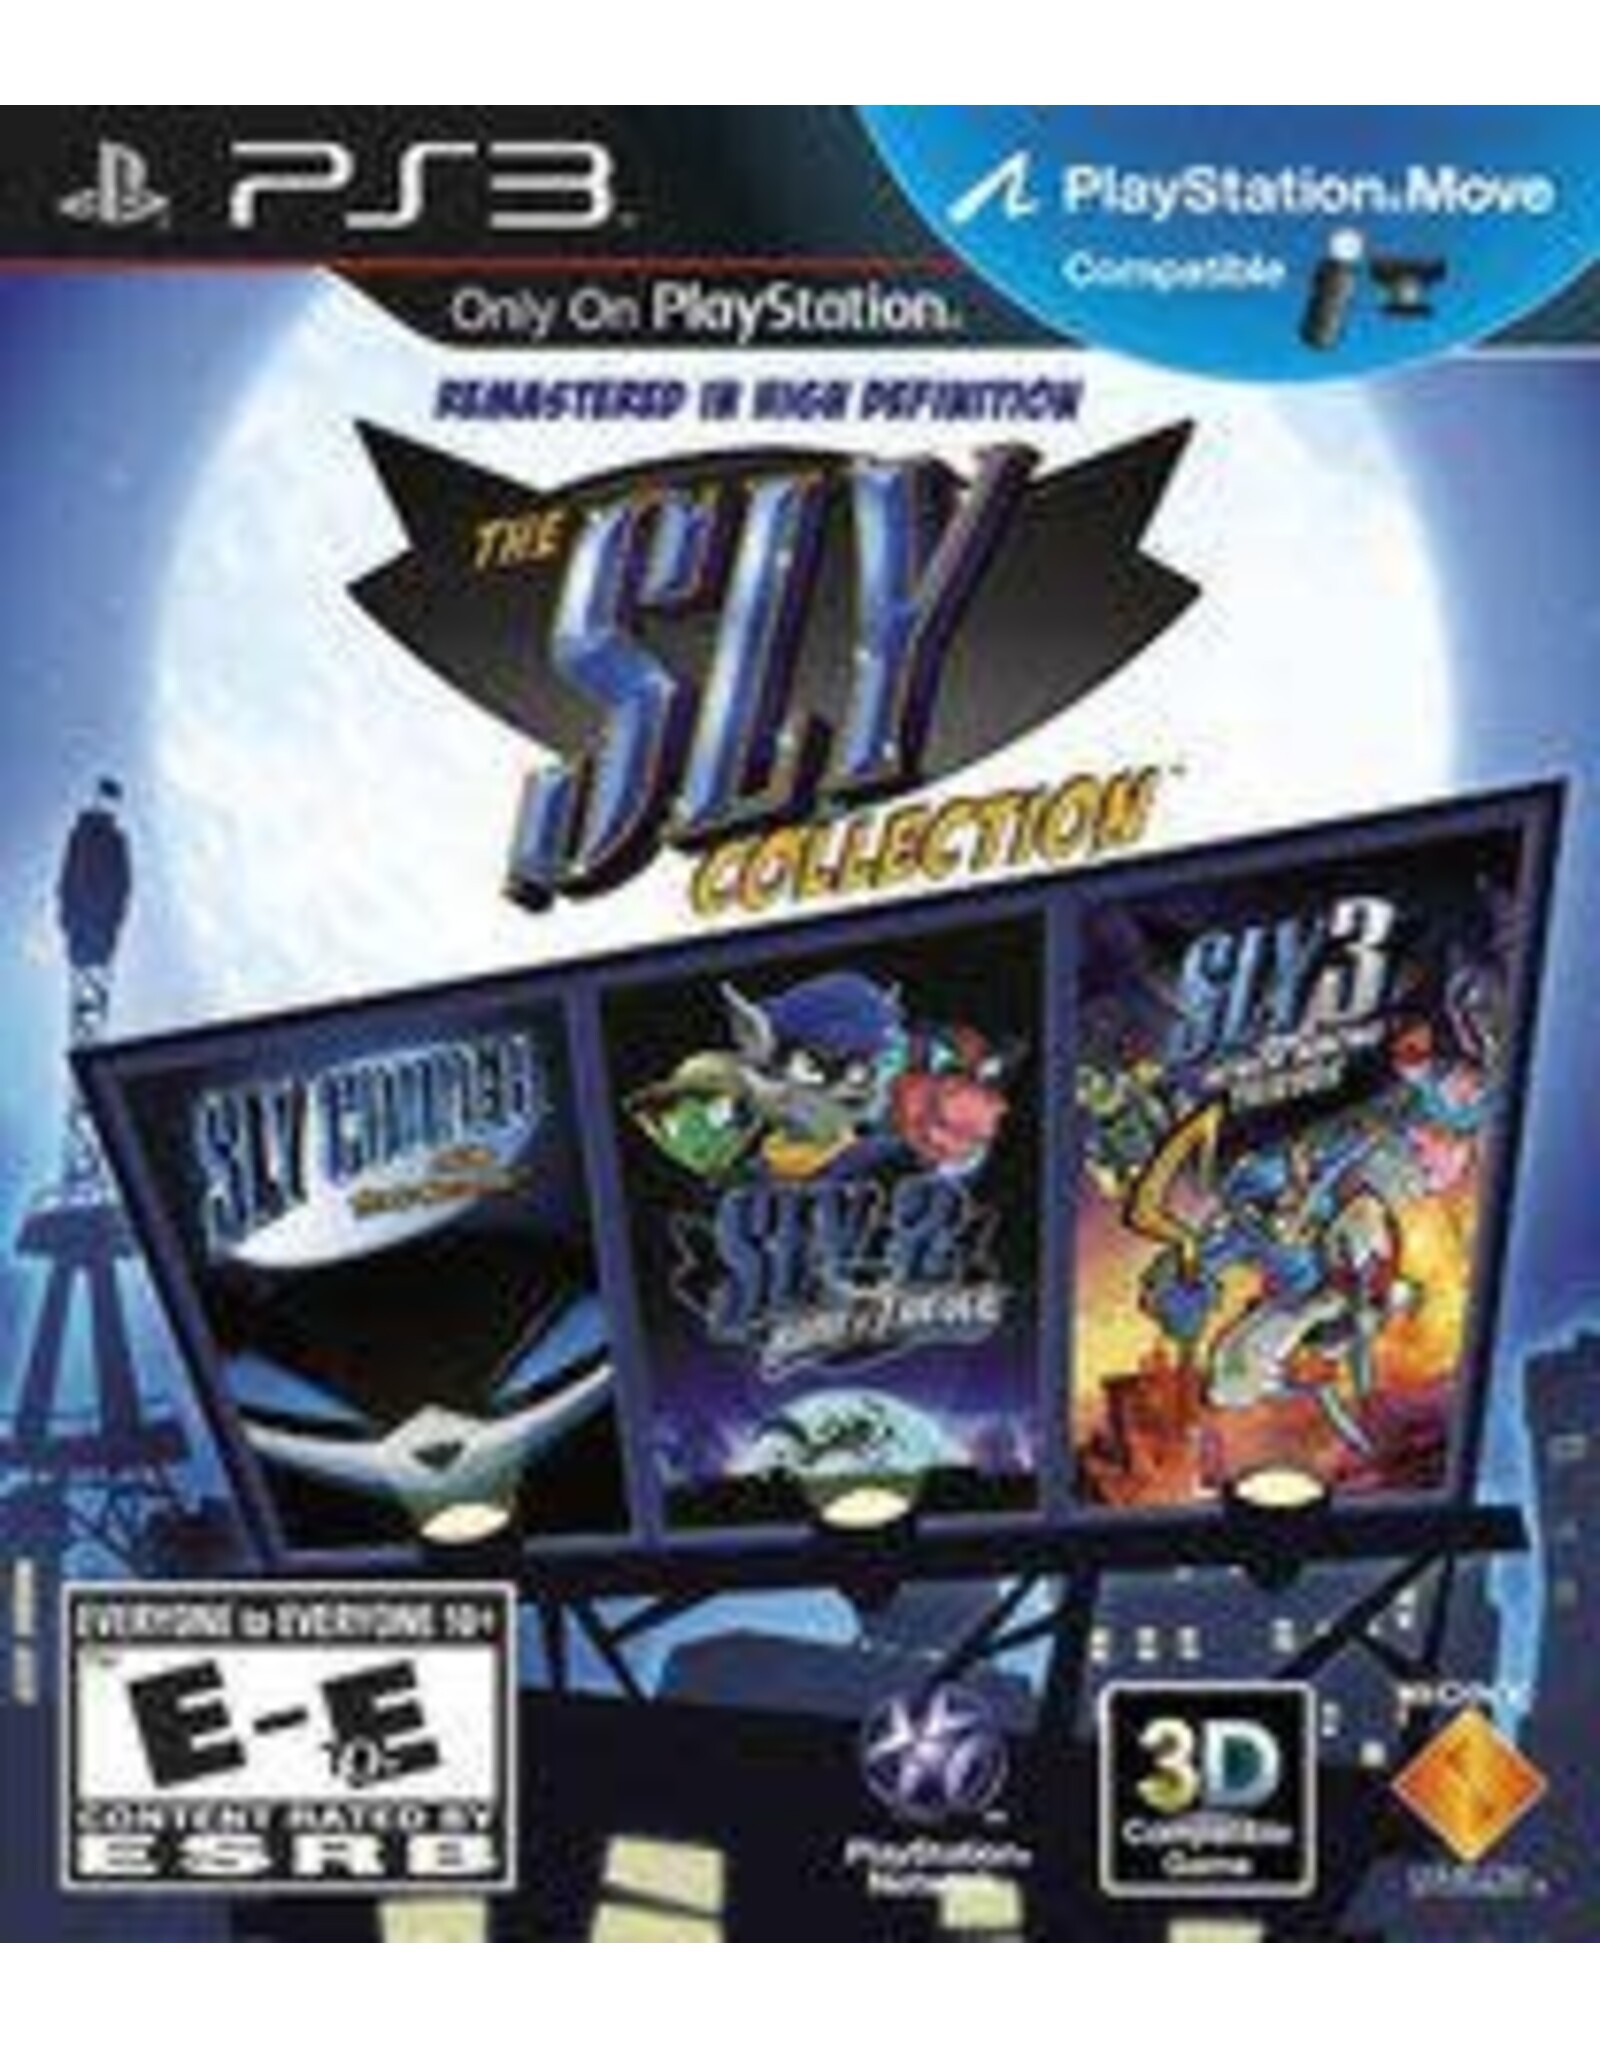 Playstation 3 Sly Collection, The (CiB)